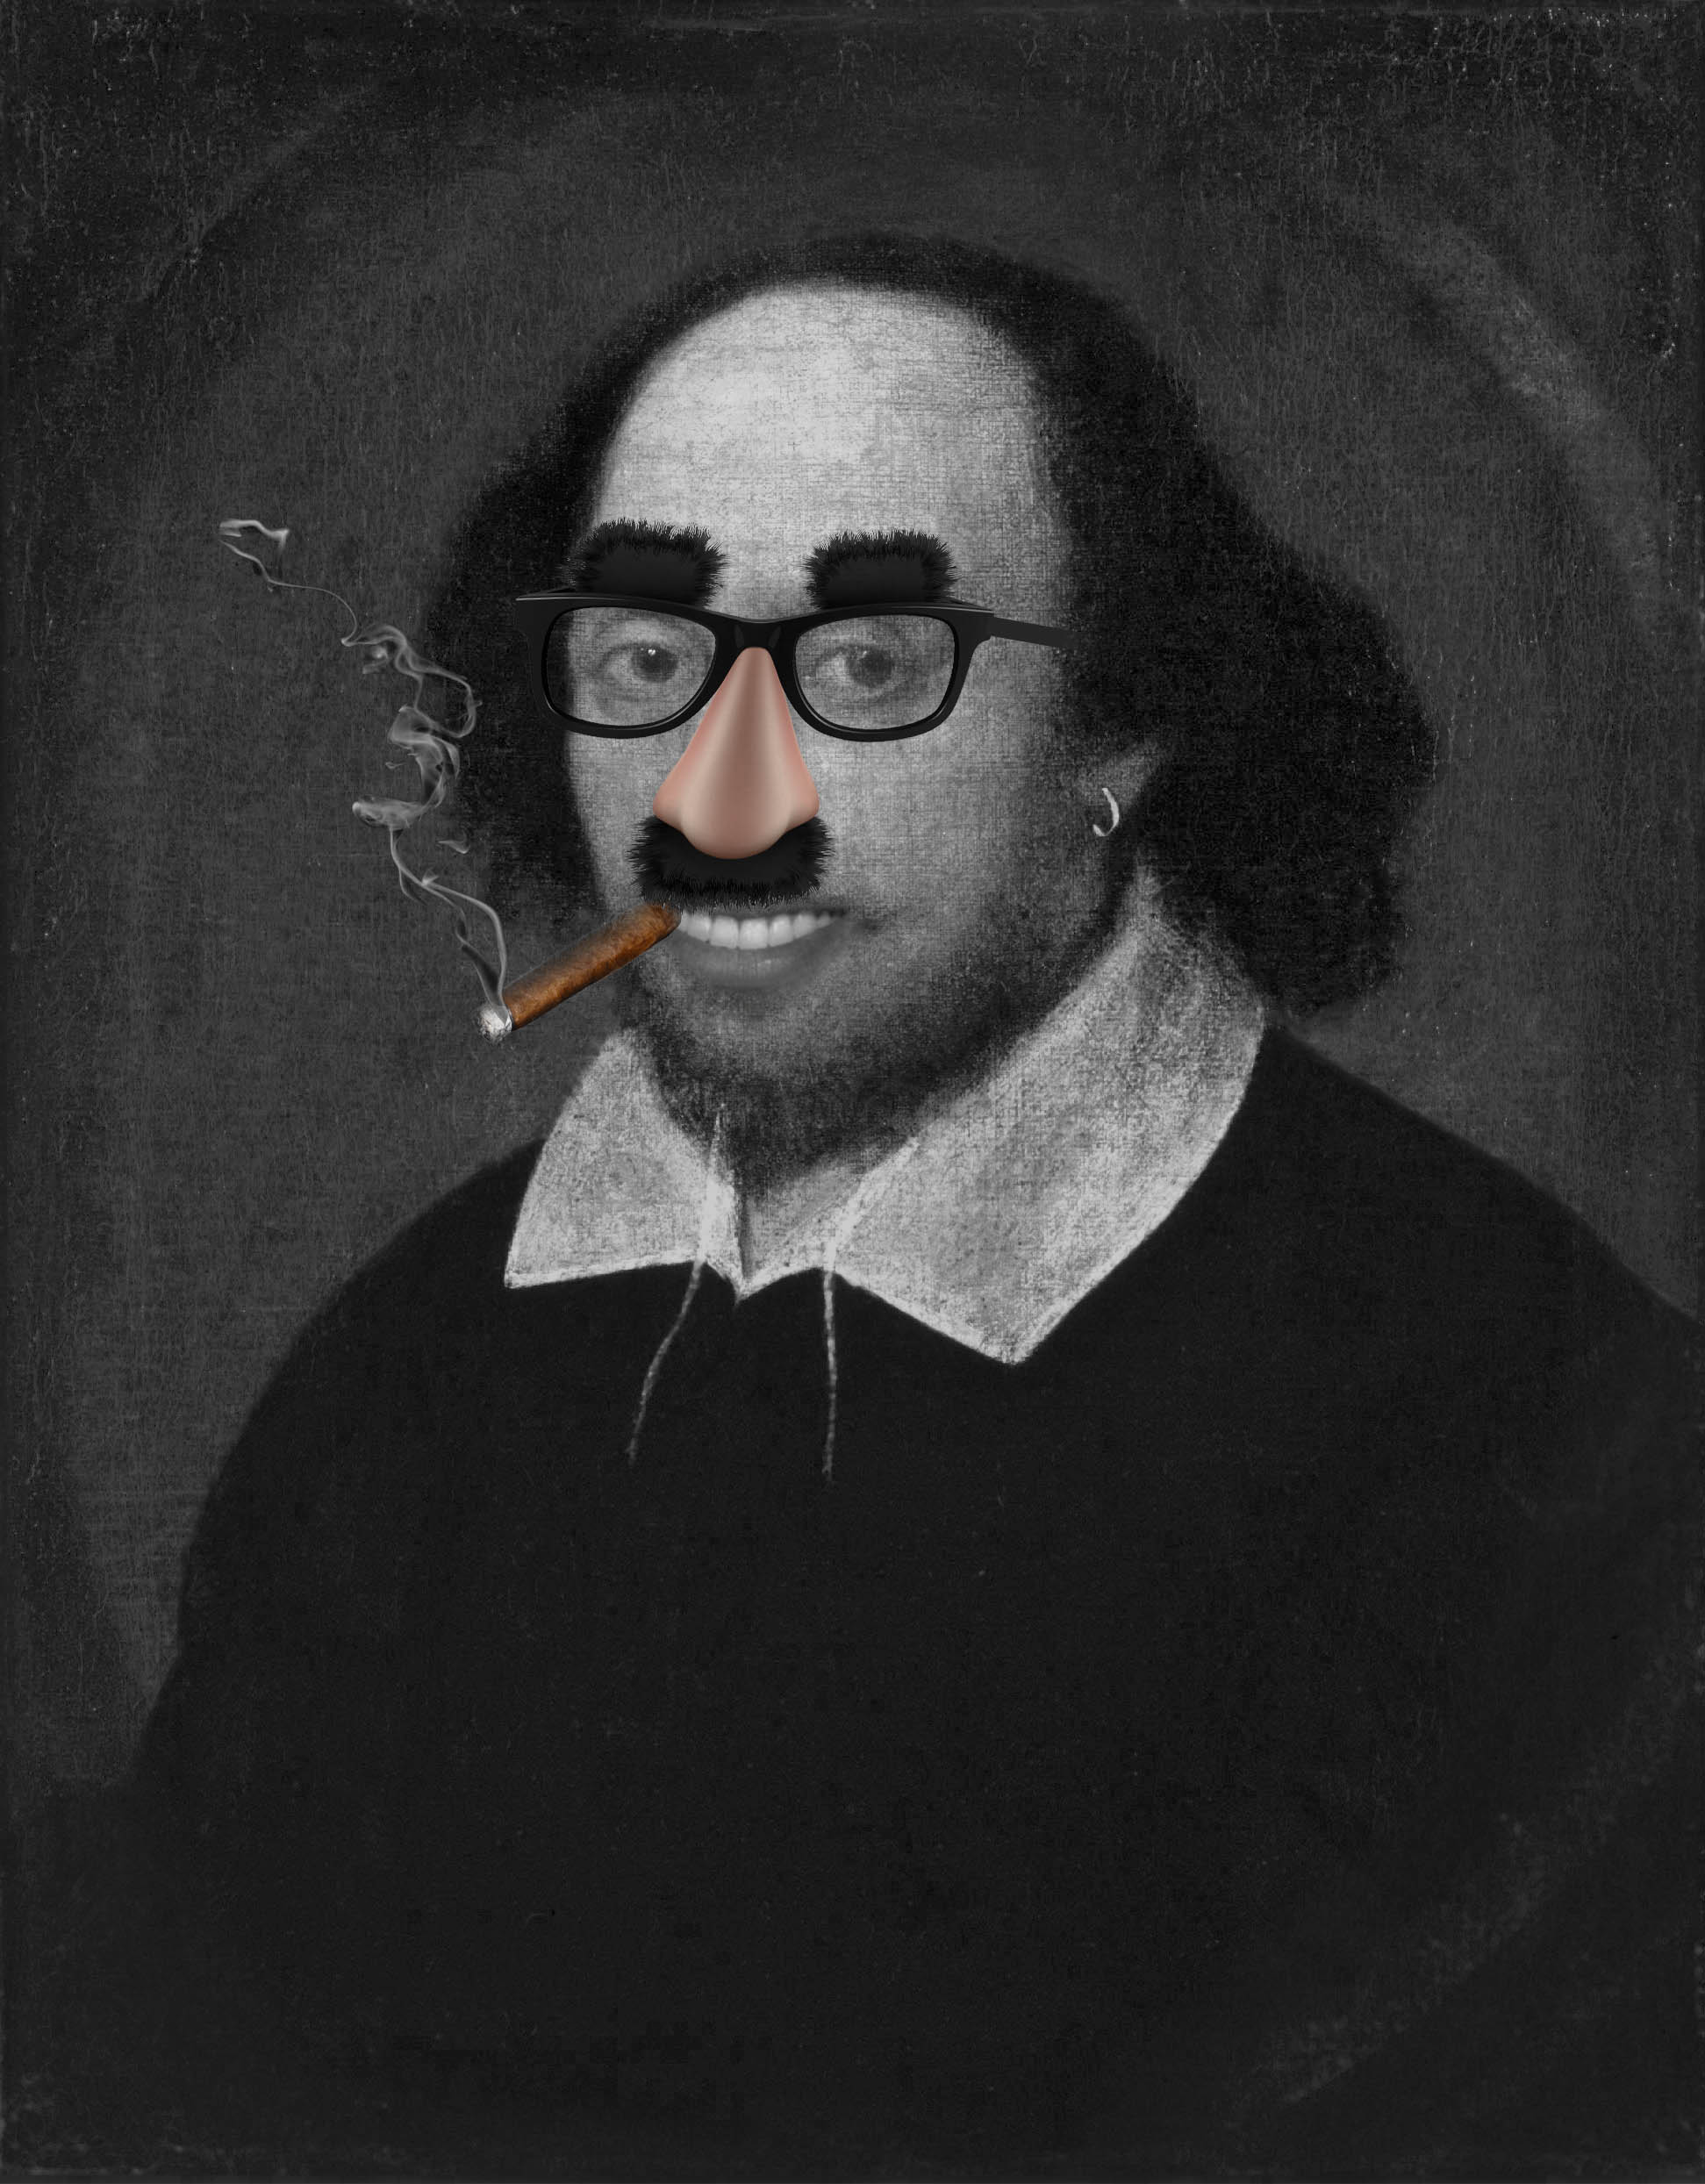 Shakespeare%20with%20Groucho%20glasses%20cigar%20and%20smoke.jpg